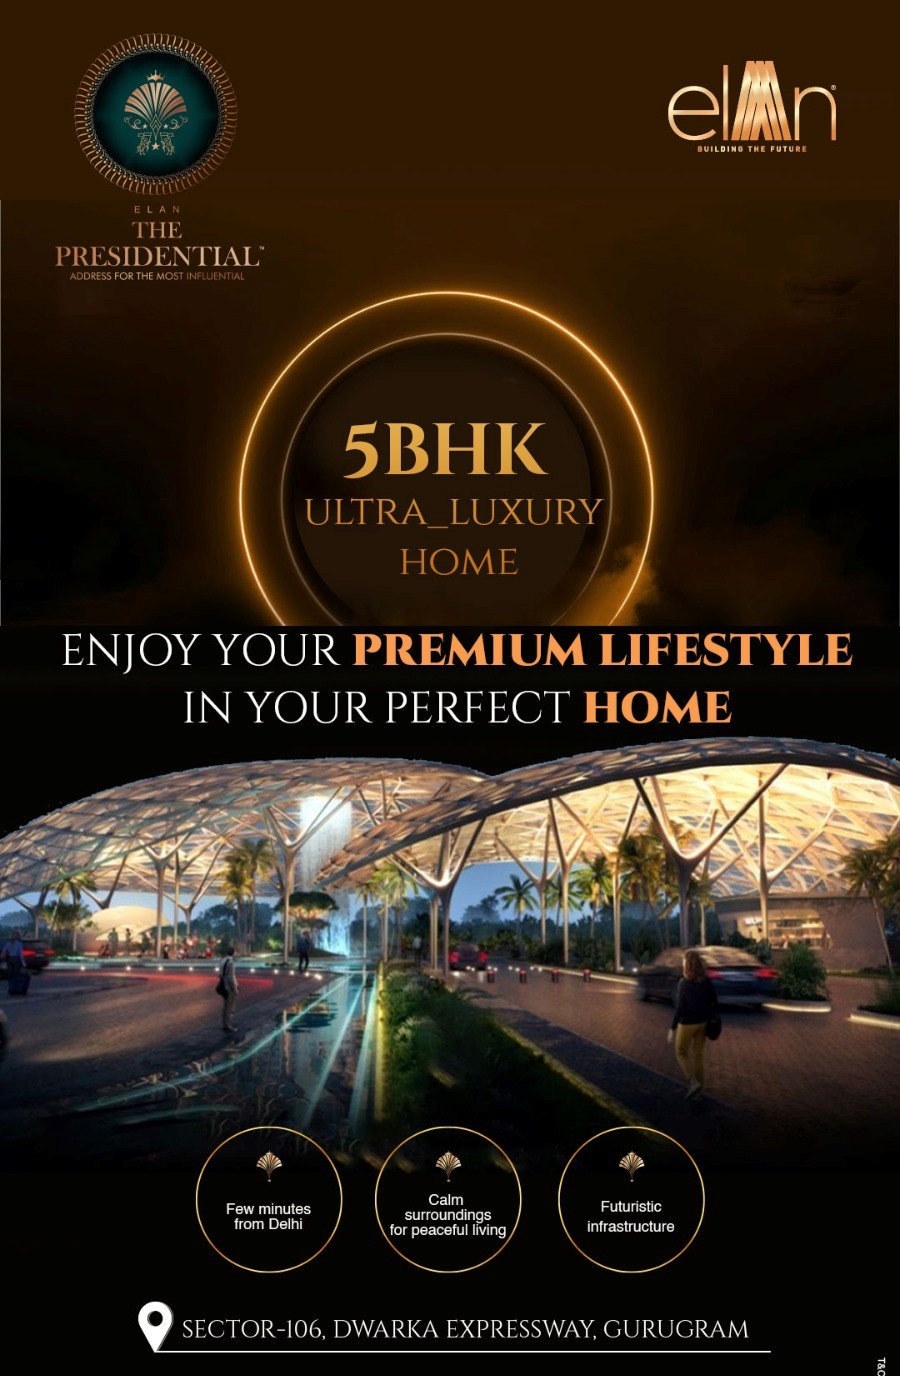 Ultra luxury home enjoy your premium lifestyle in your perfect home at Elan The Presidential, Gurgaon Update